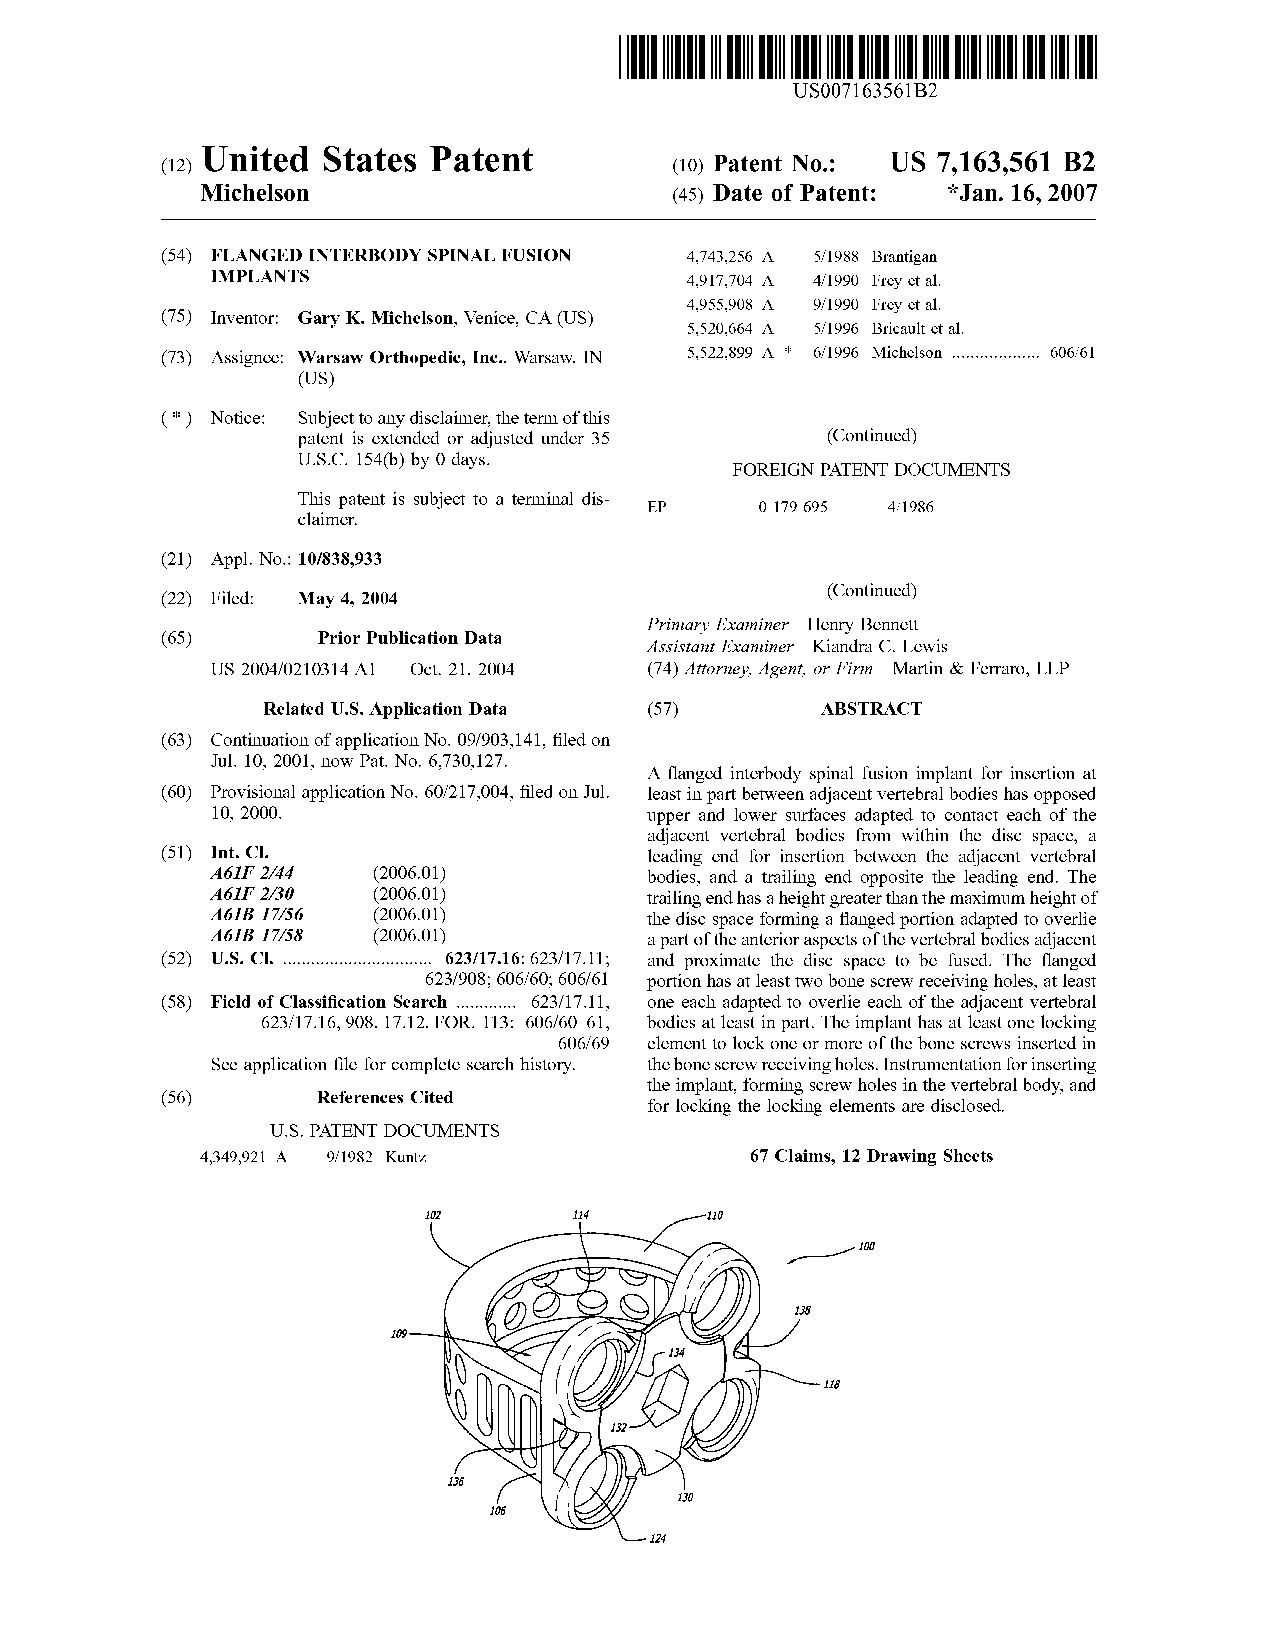 Flanged interbody spinal fusion implants - Patent 7,163,561